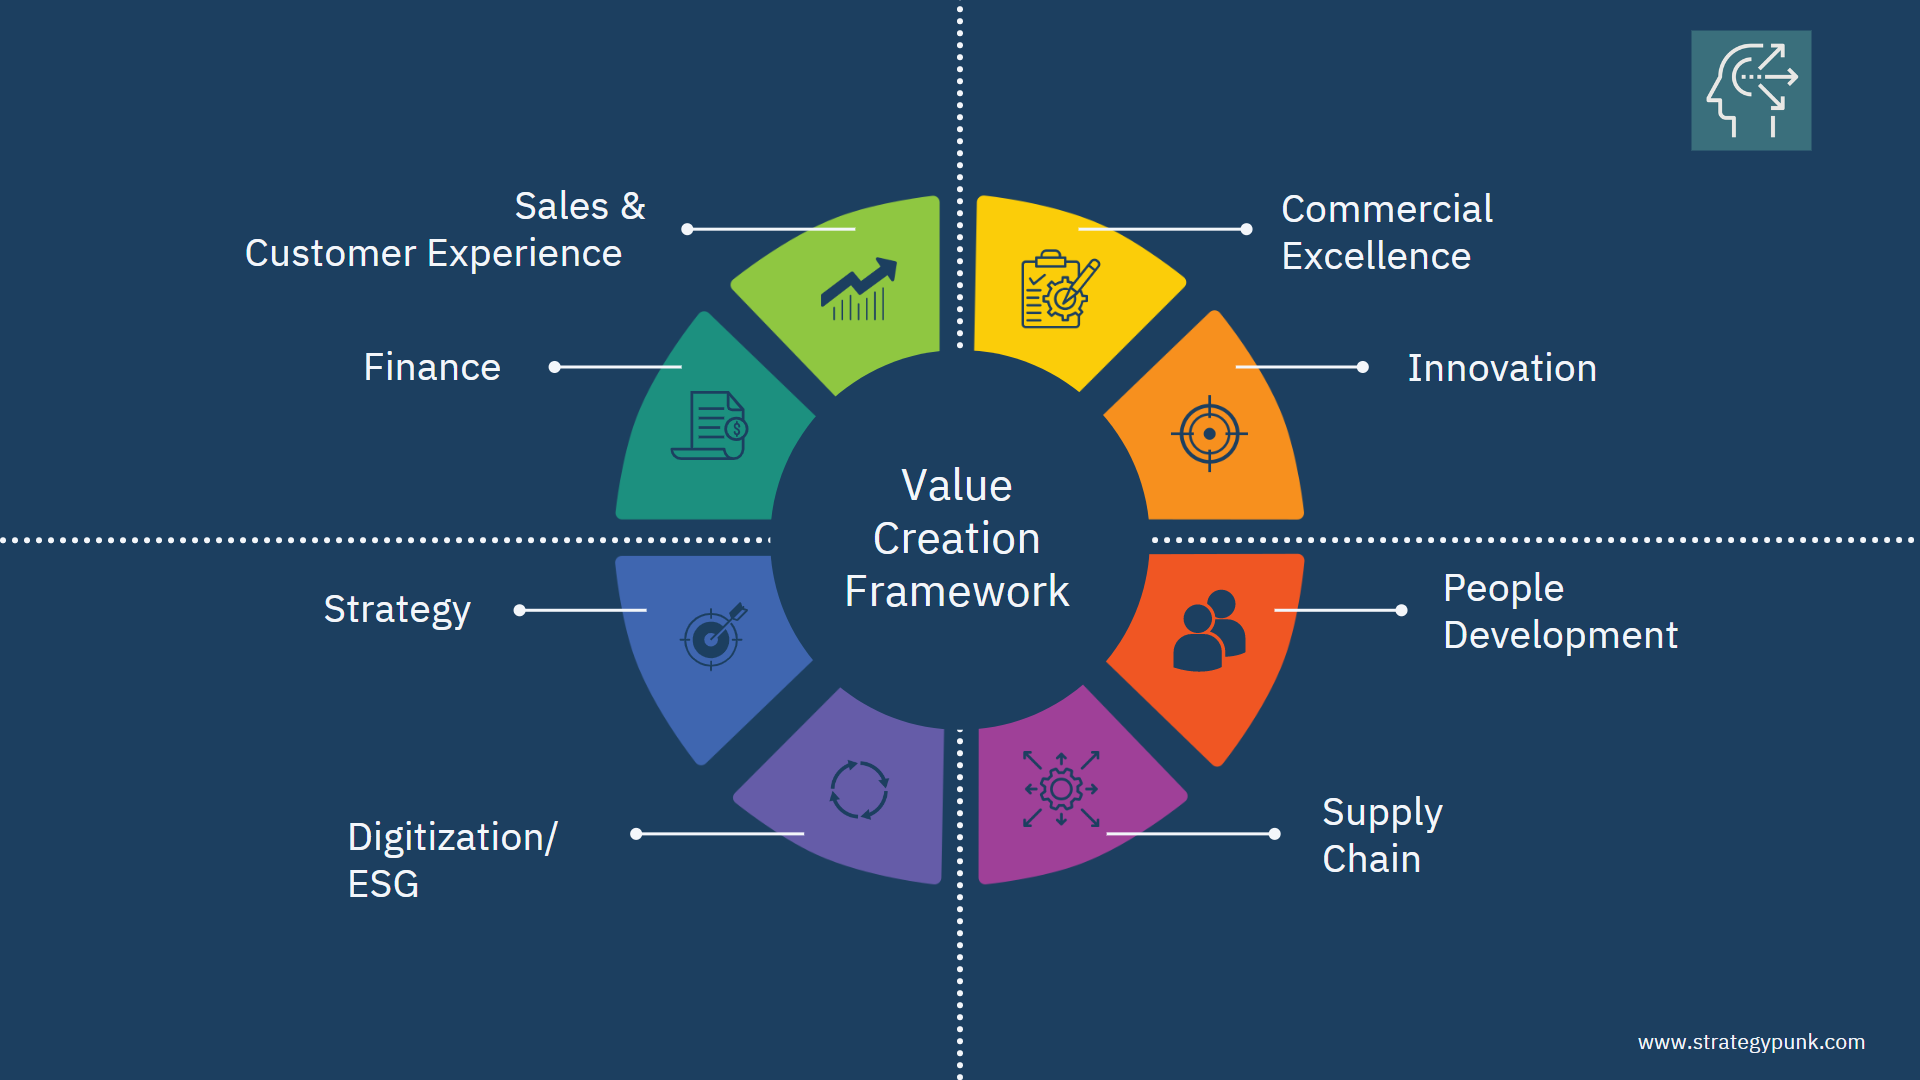 What is Value Creation?